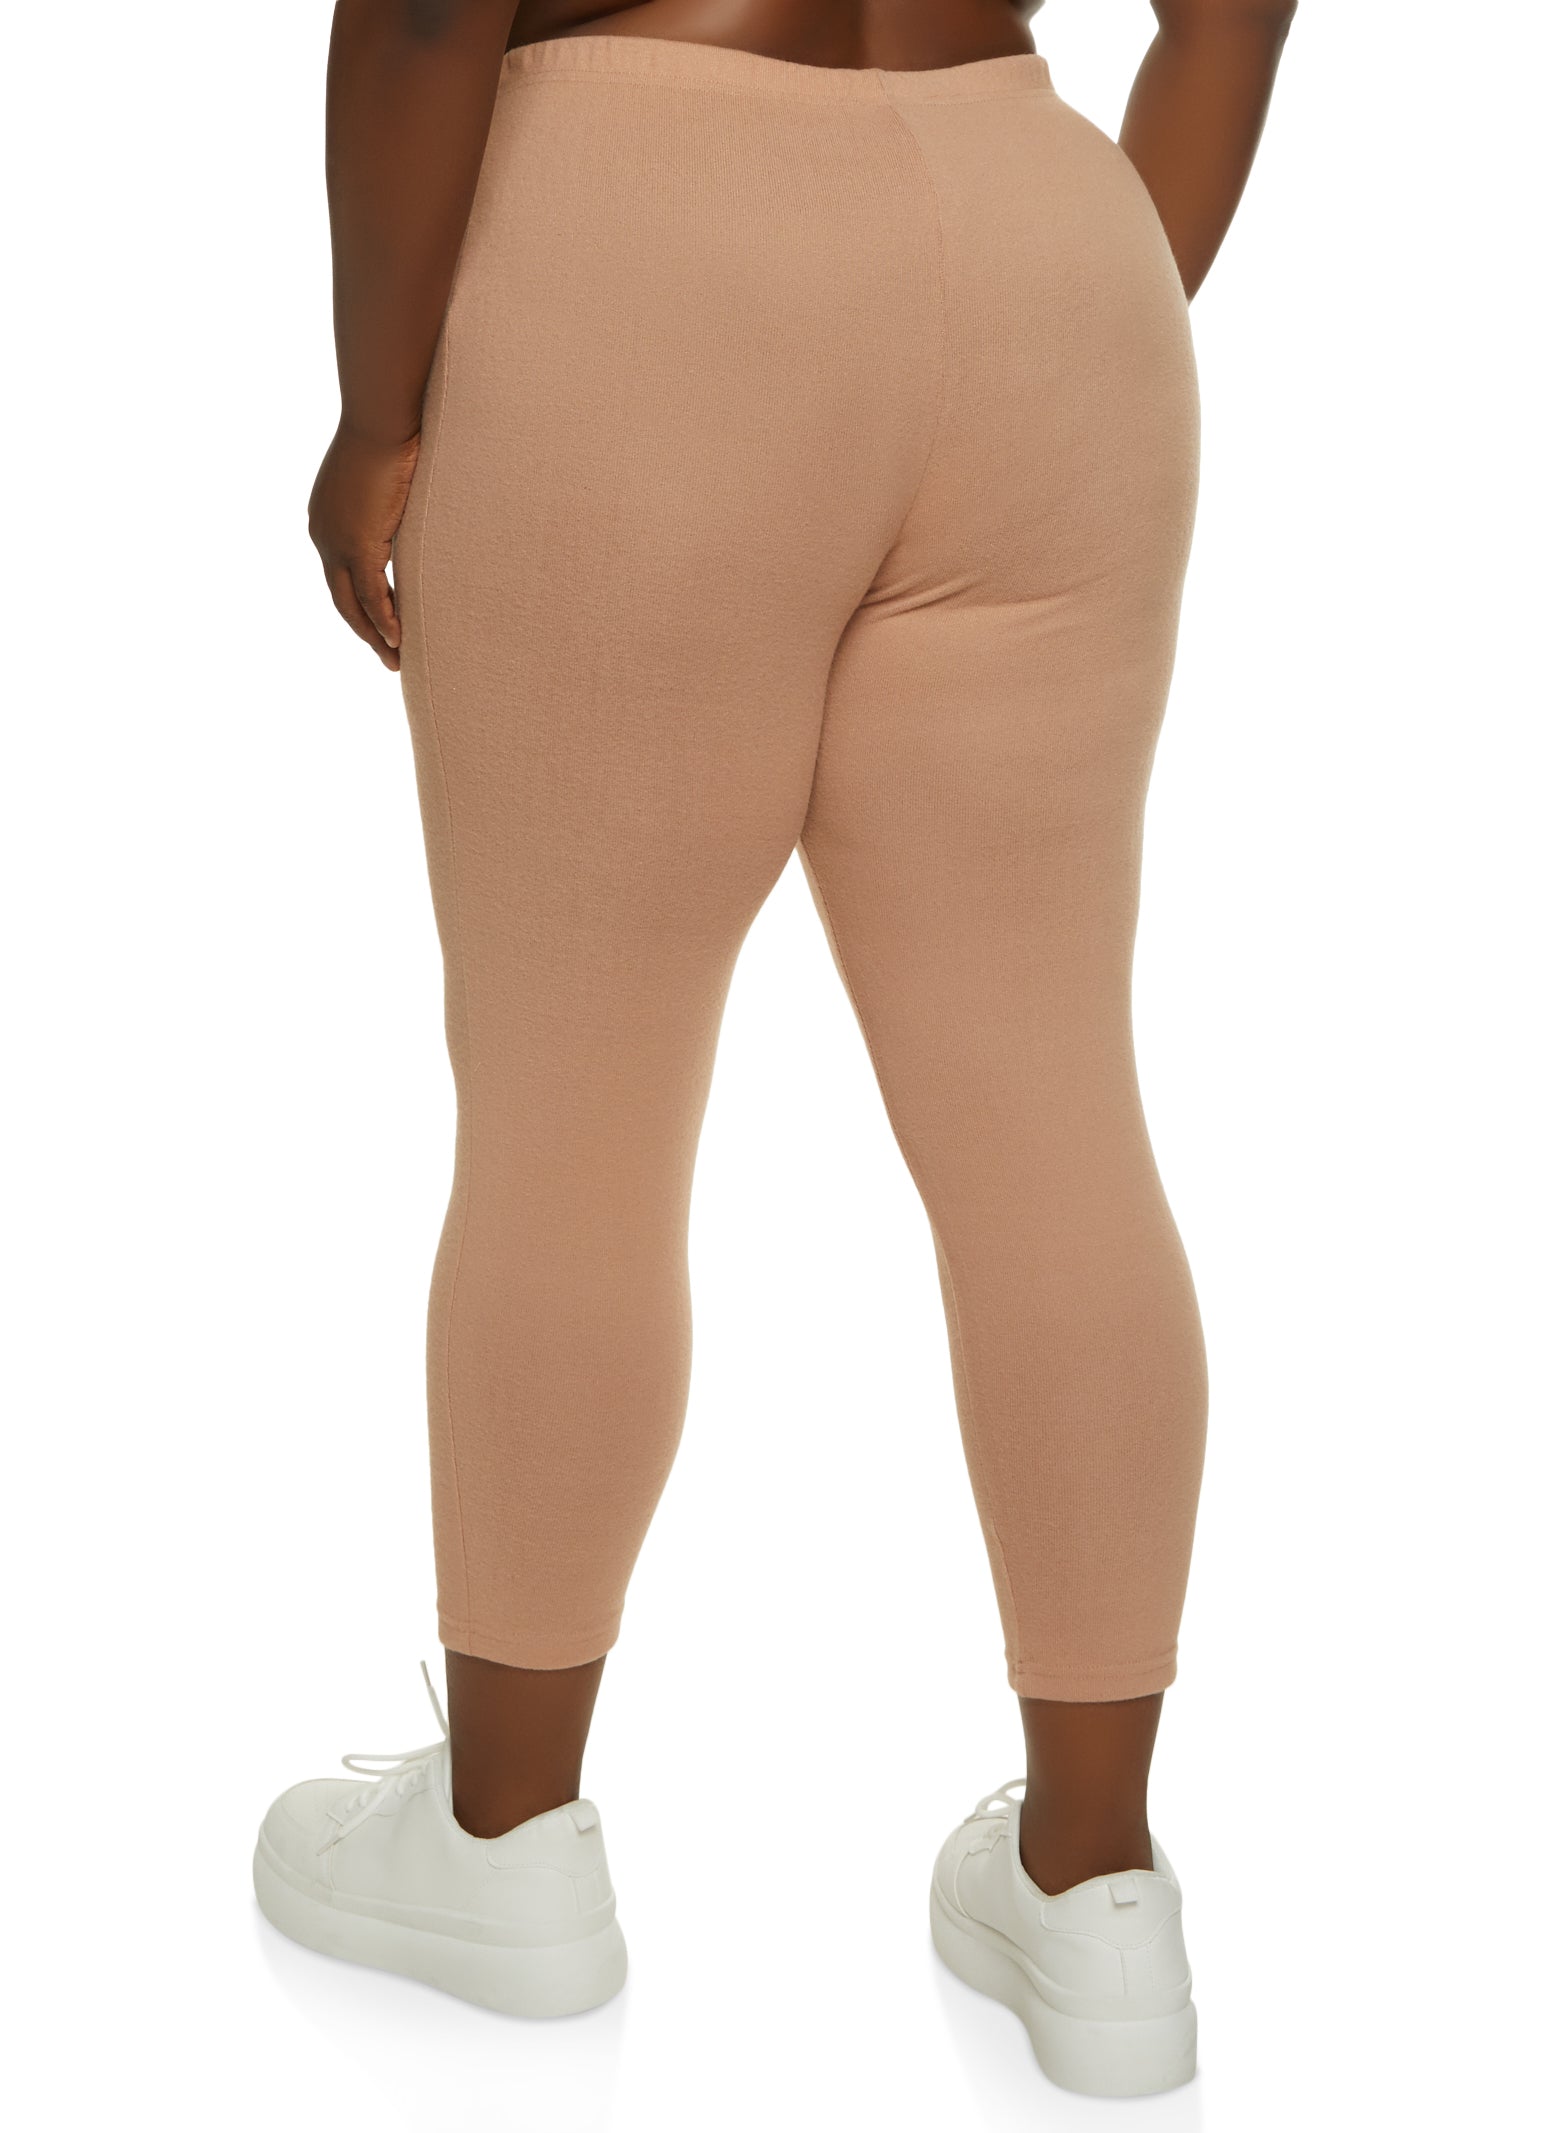 Year of Ours Thermal Hockey Legging - Tan